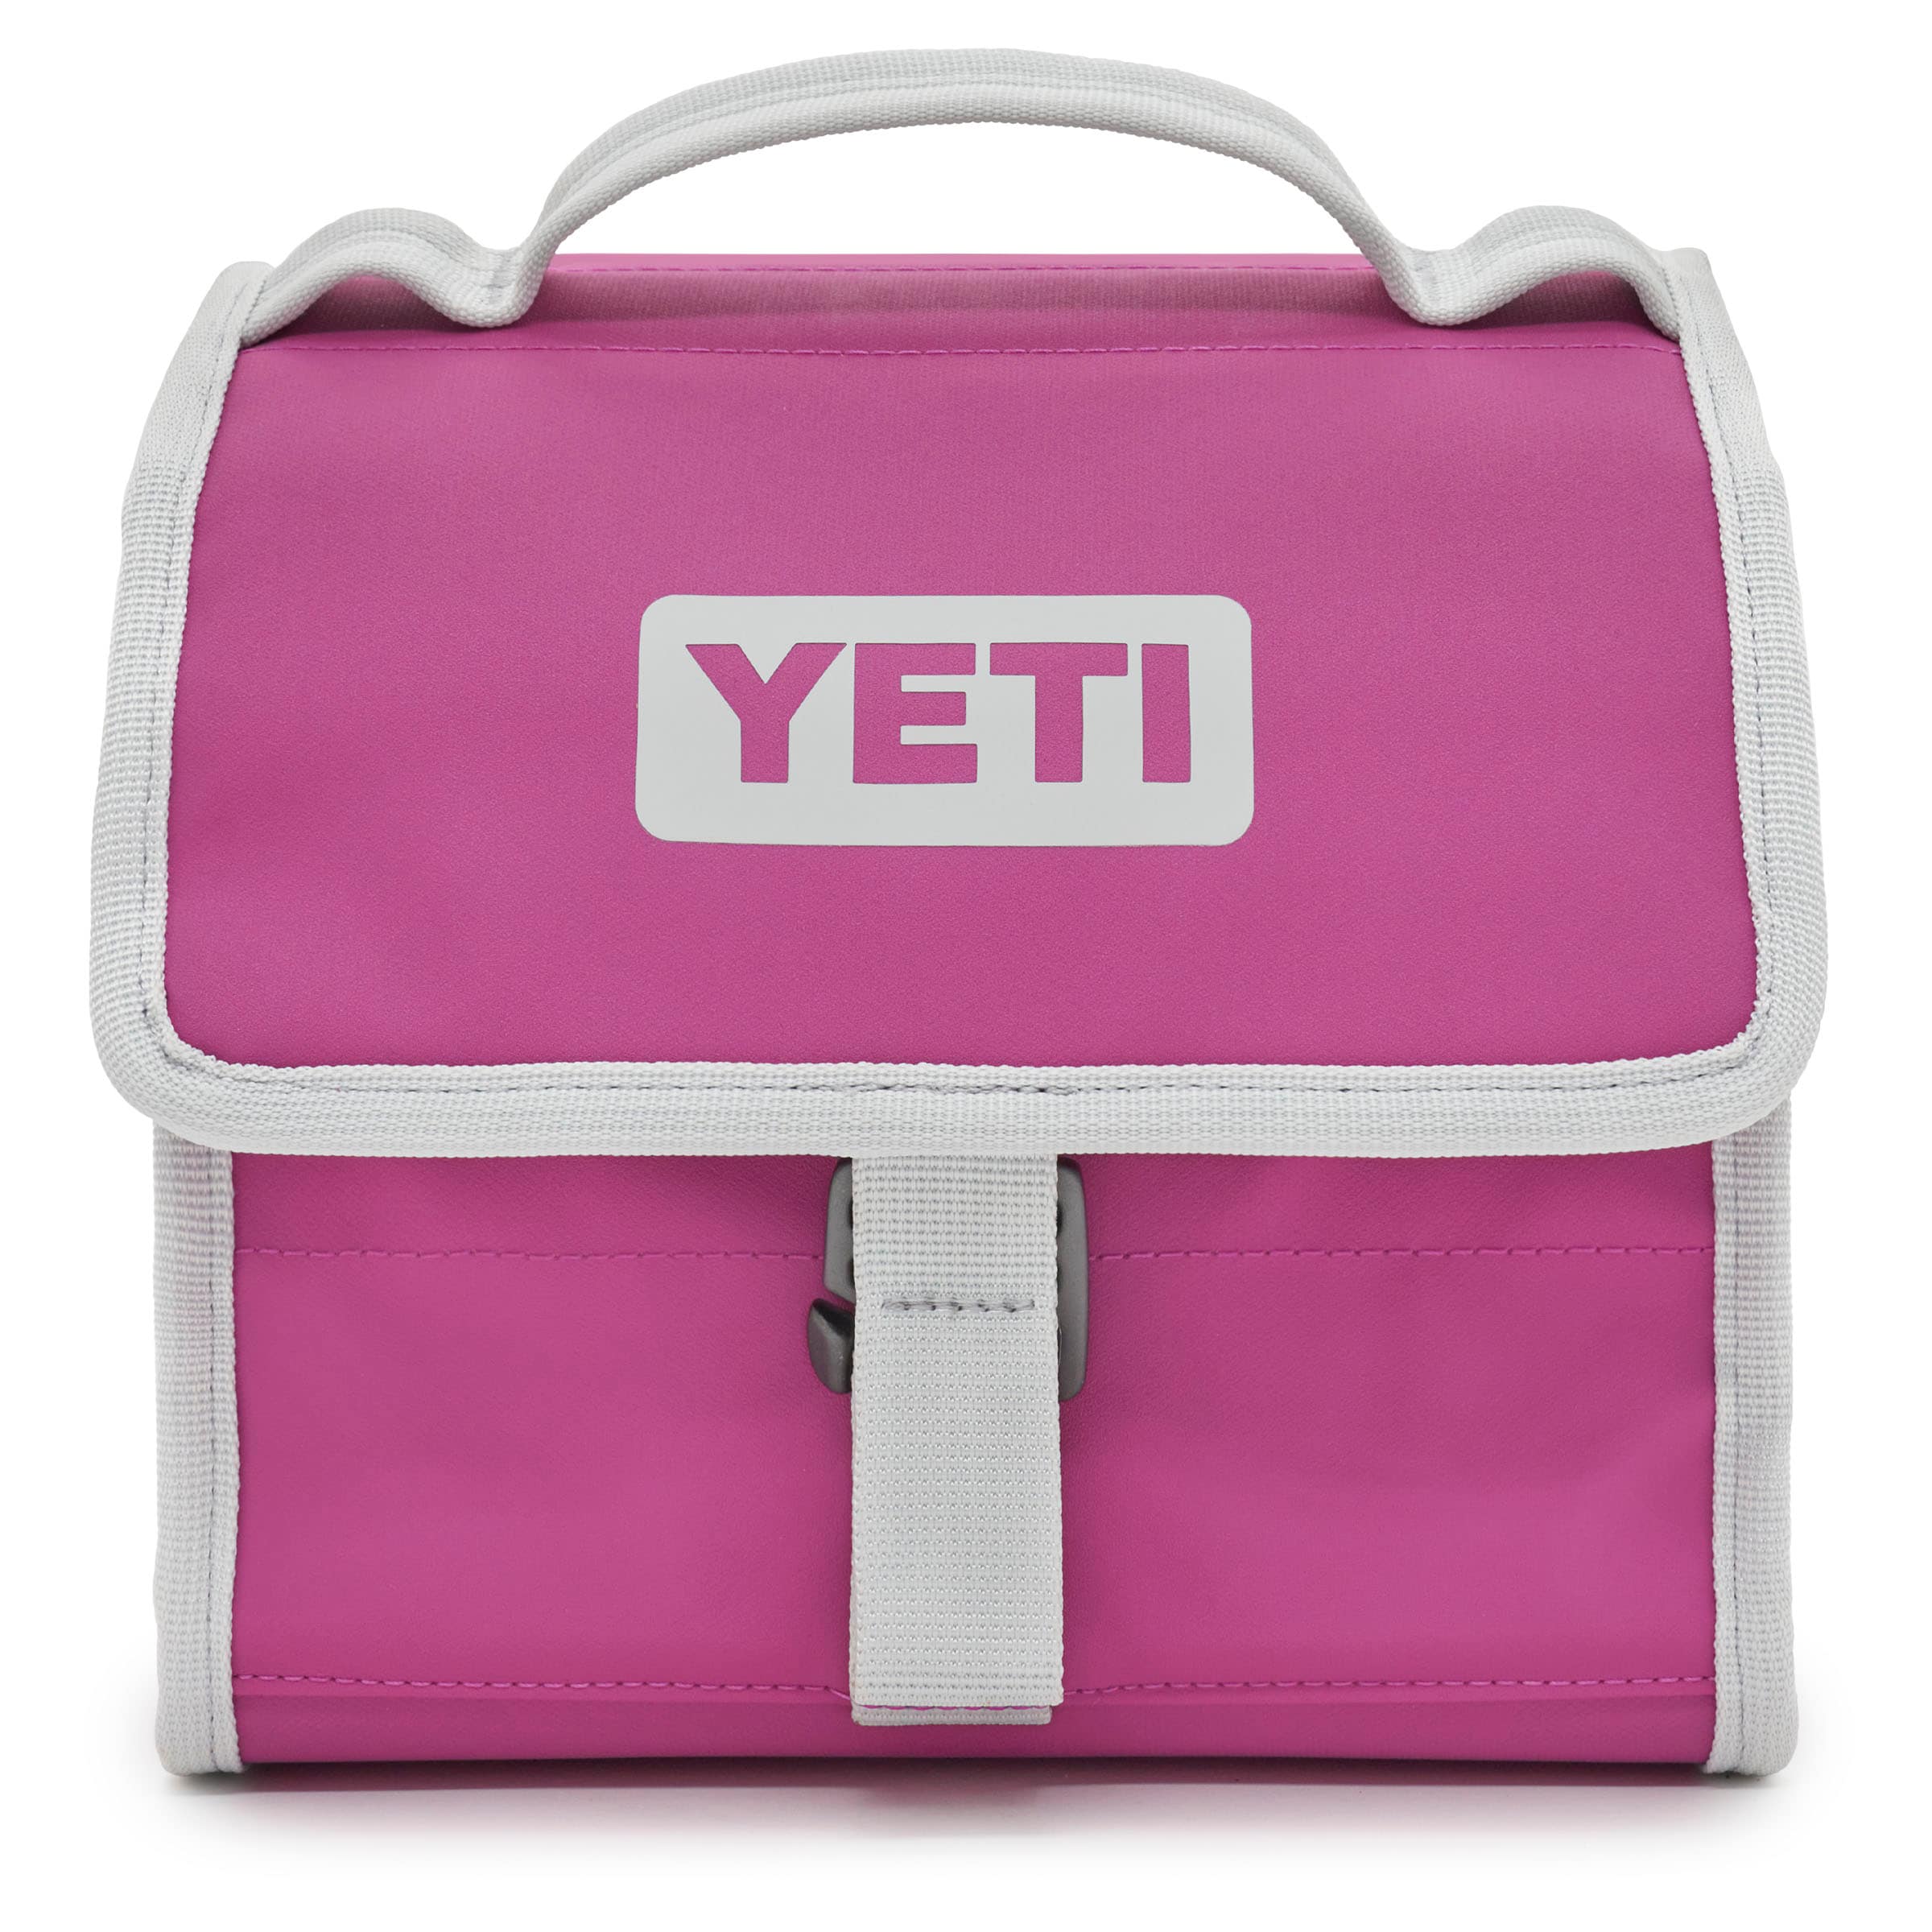 Yeti Daytrip Lunch Bag Review 2022